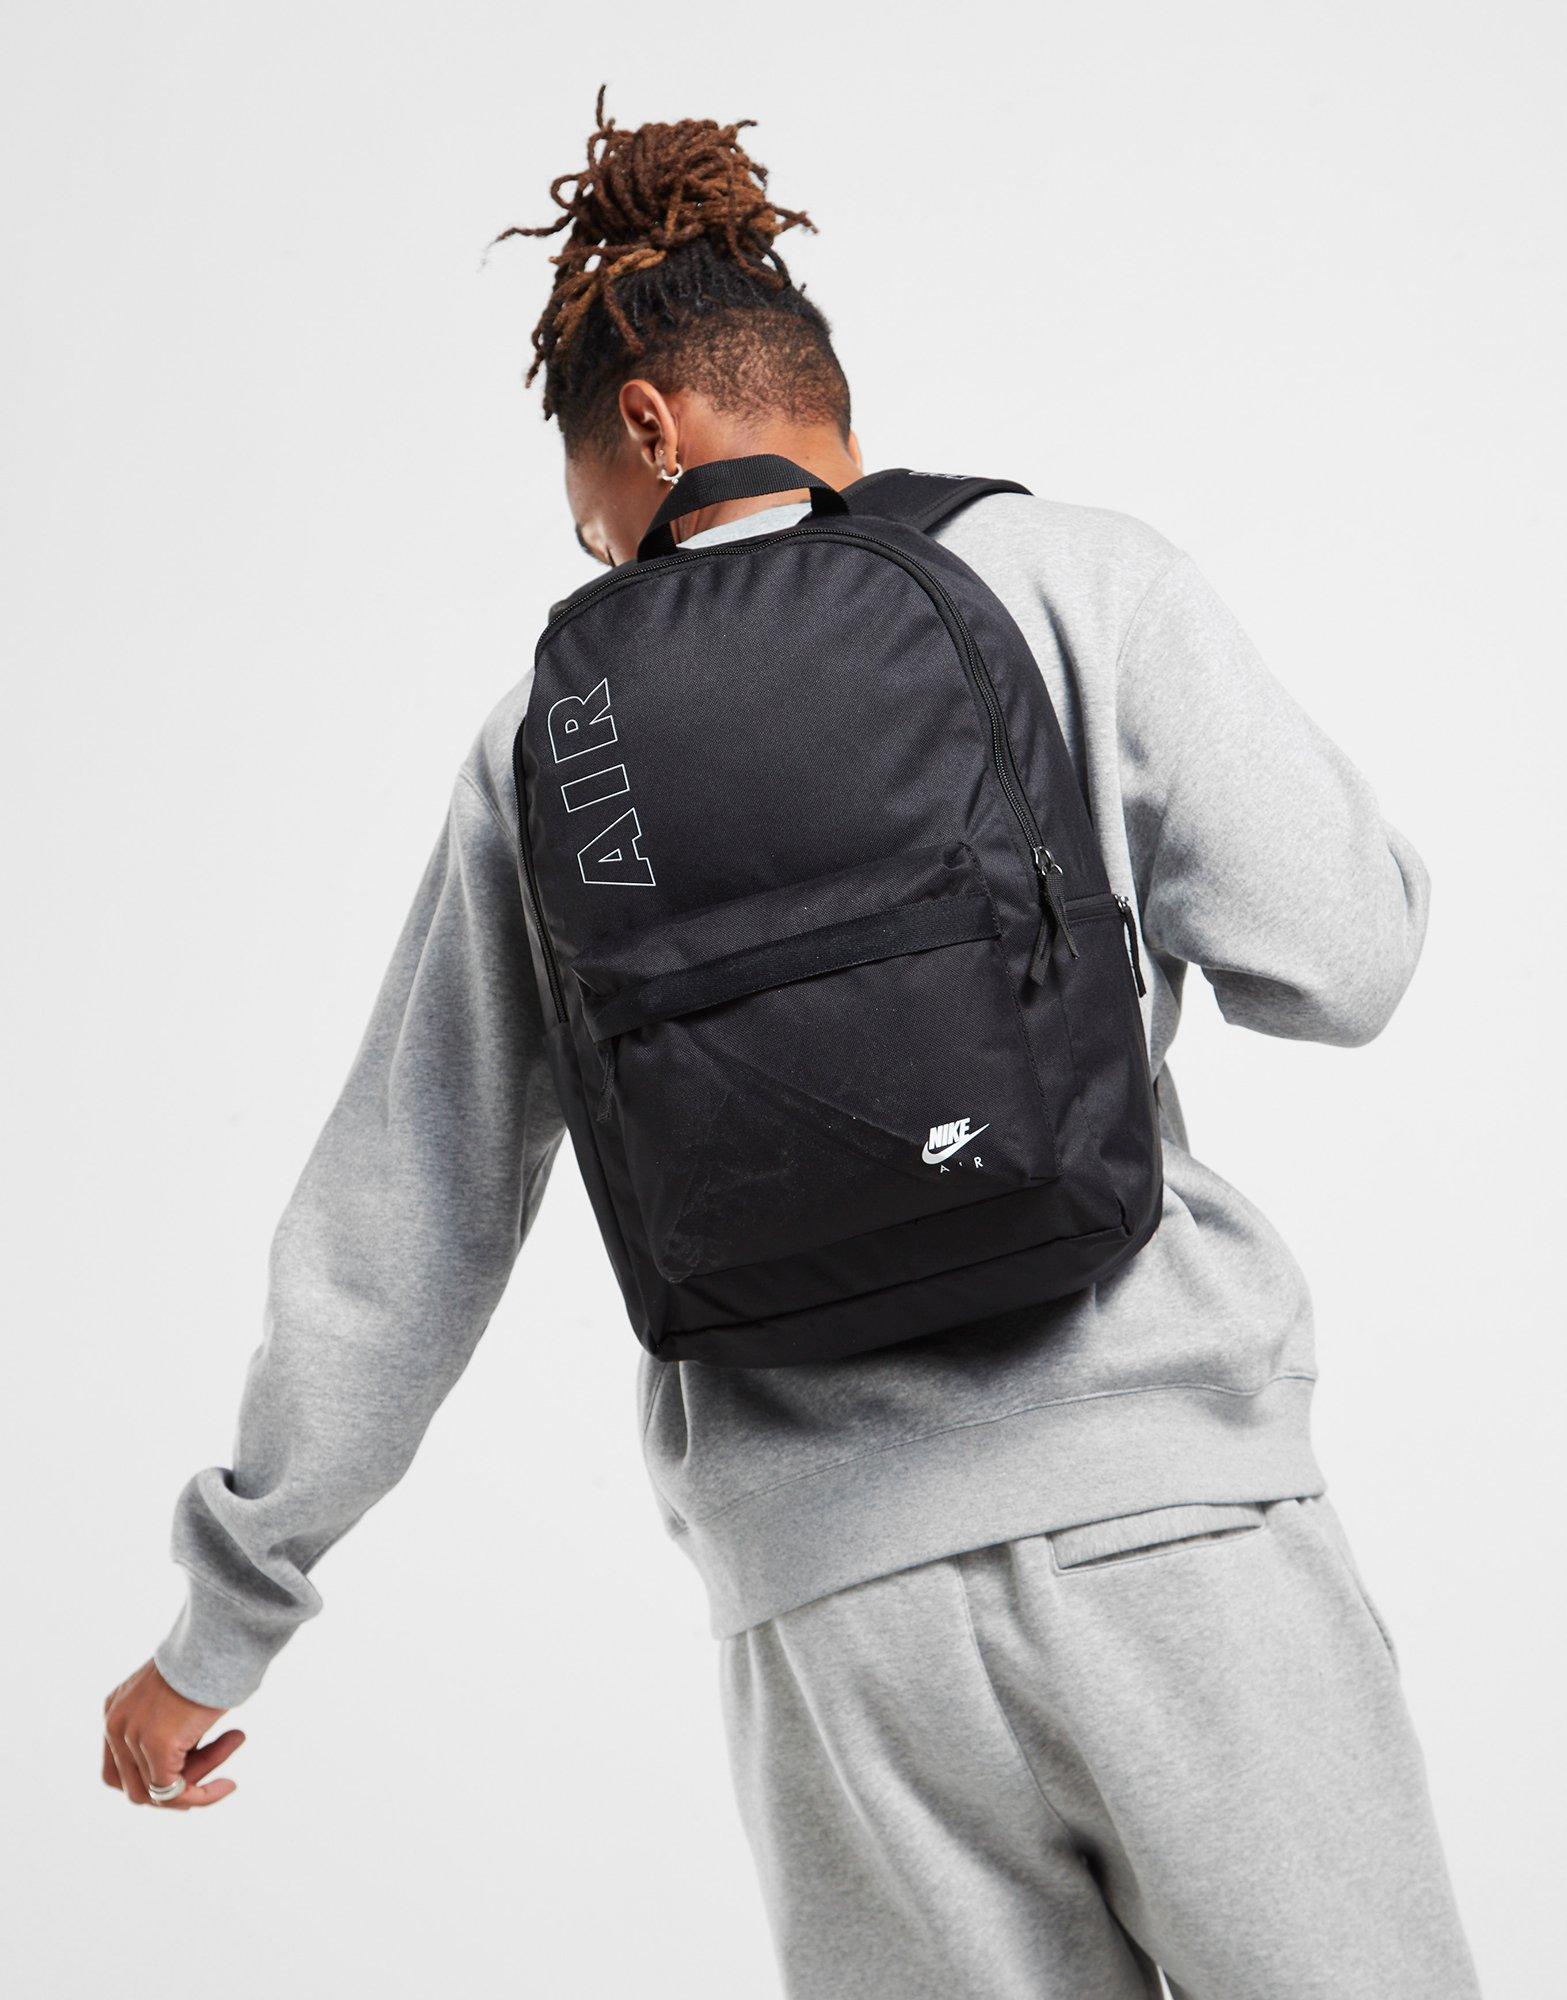 converse backpack jd